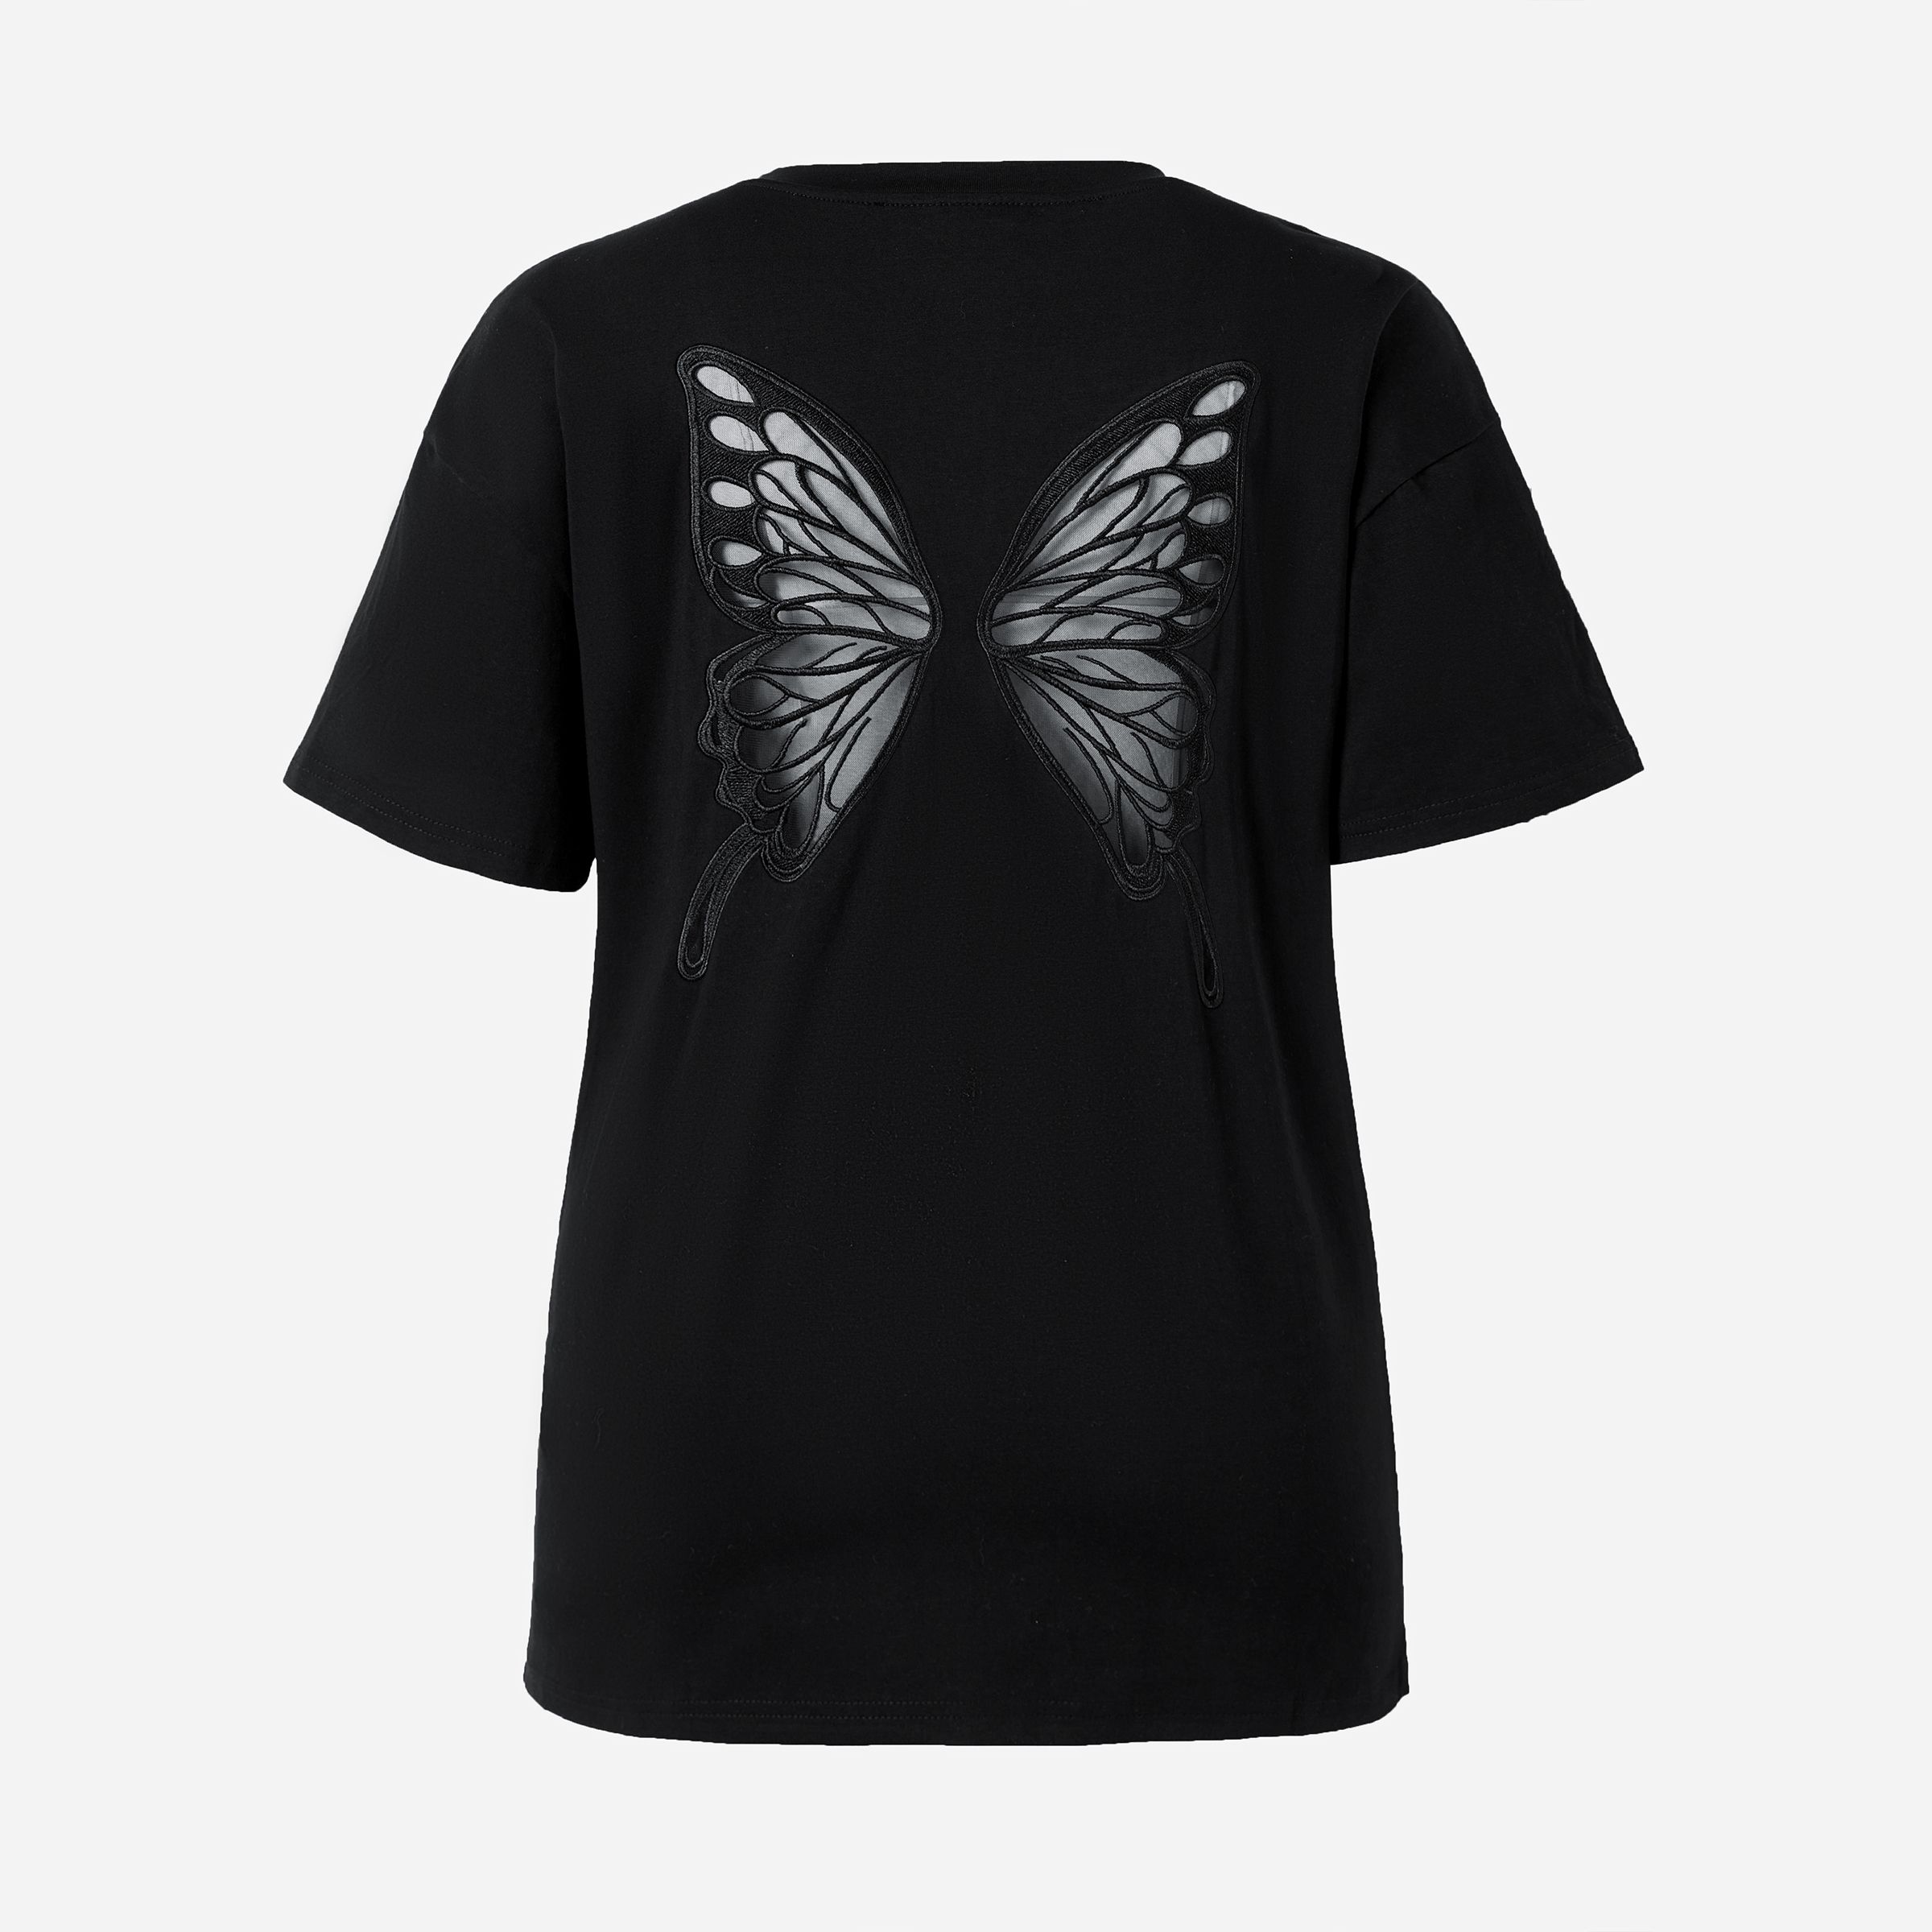 Mommy and Me Black Mesh Butterfly Wing Pattern Short-Sleeve Cotton Matching Top